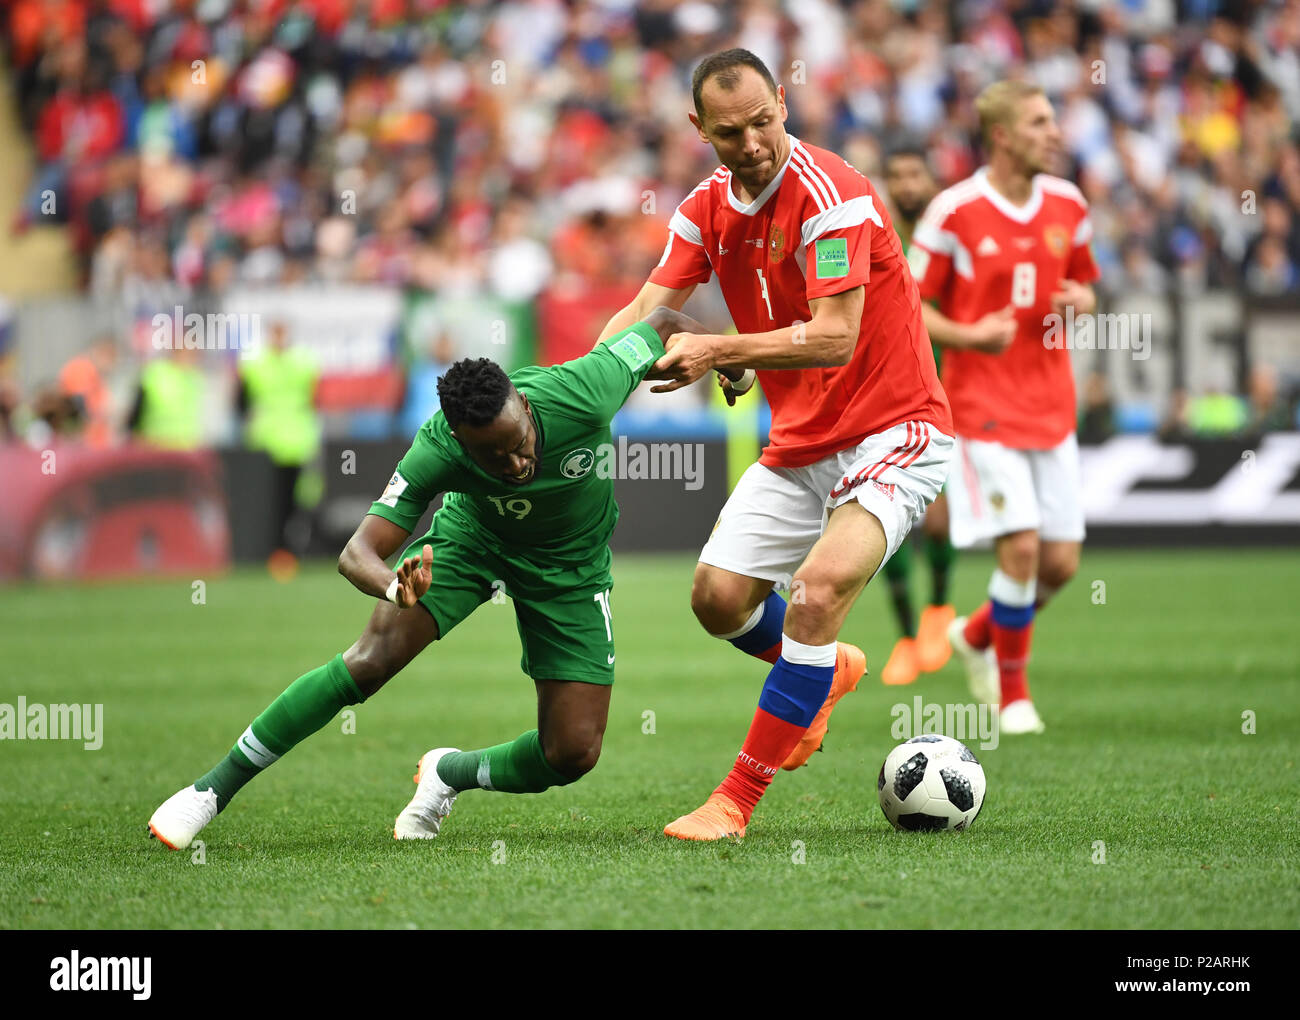 Moscow, Russia. 14th June, 2018. Soccer; FIFA World Cup, First Round, Group A, First Matchday, Russia vs. Saudi Arabia at the Luzhniki Stadium: Sergej Ignaschewitsch from Russia and Fahad Al-Muwallad (L) from Saudi Arabia in action. Photo: Federico Gambarini/dpa Credit: dpa picture alliance/Alamy Live News Stock Photo